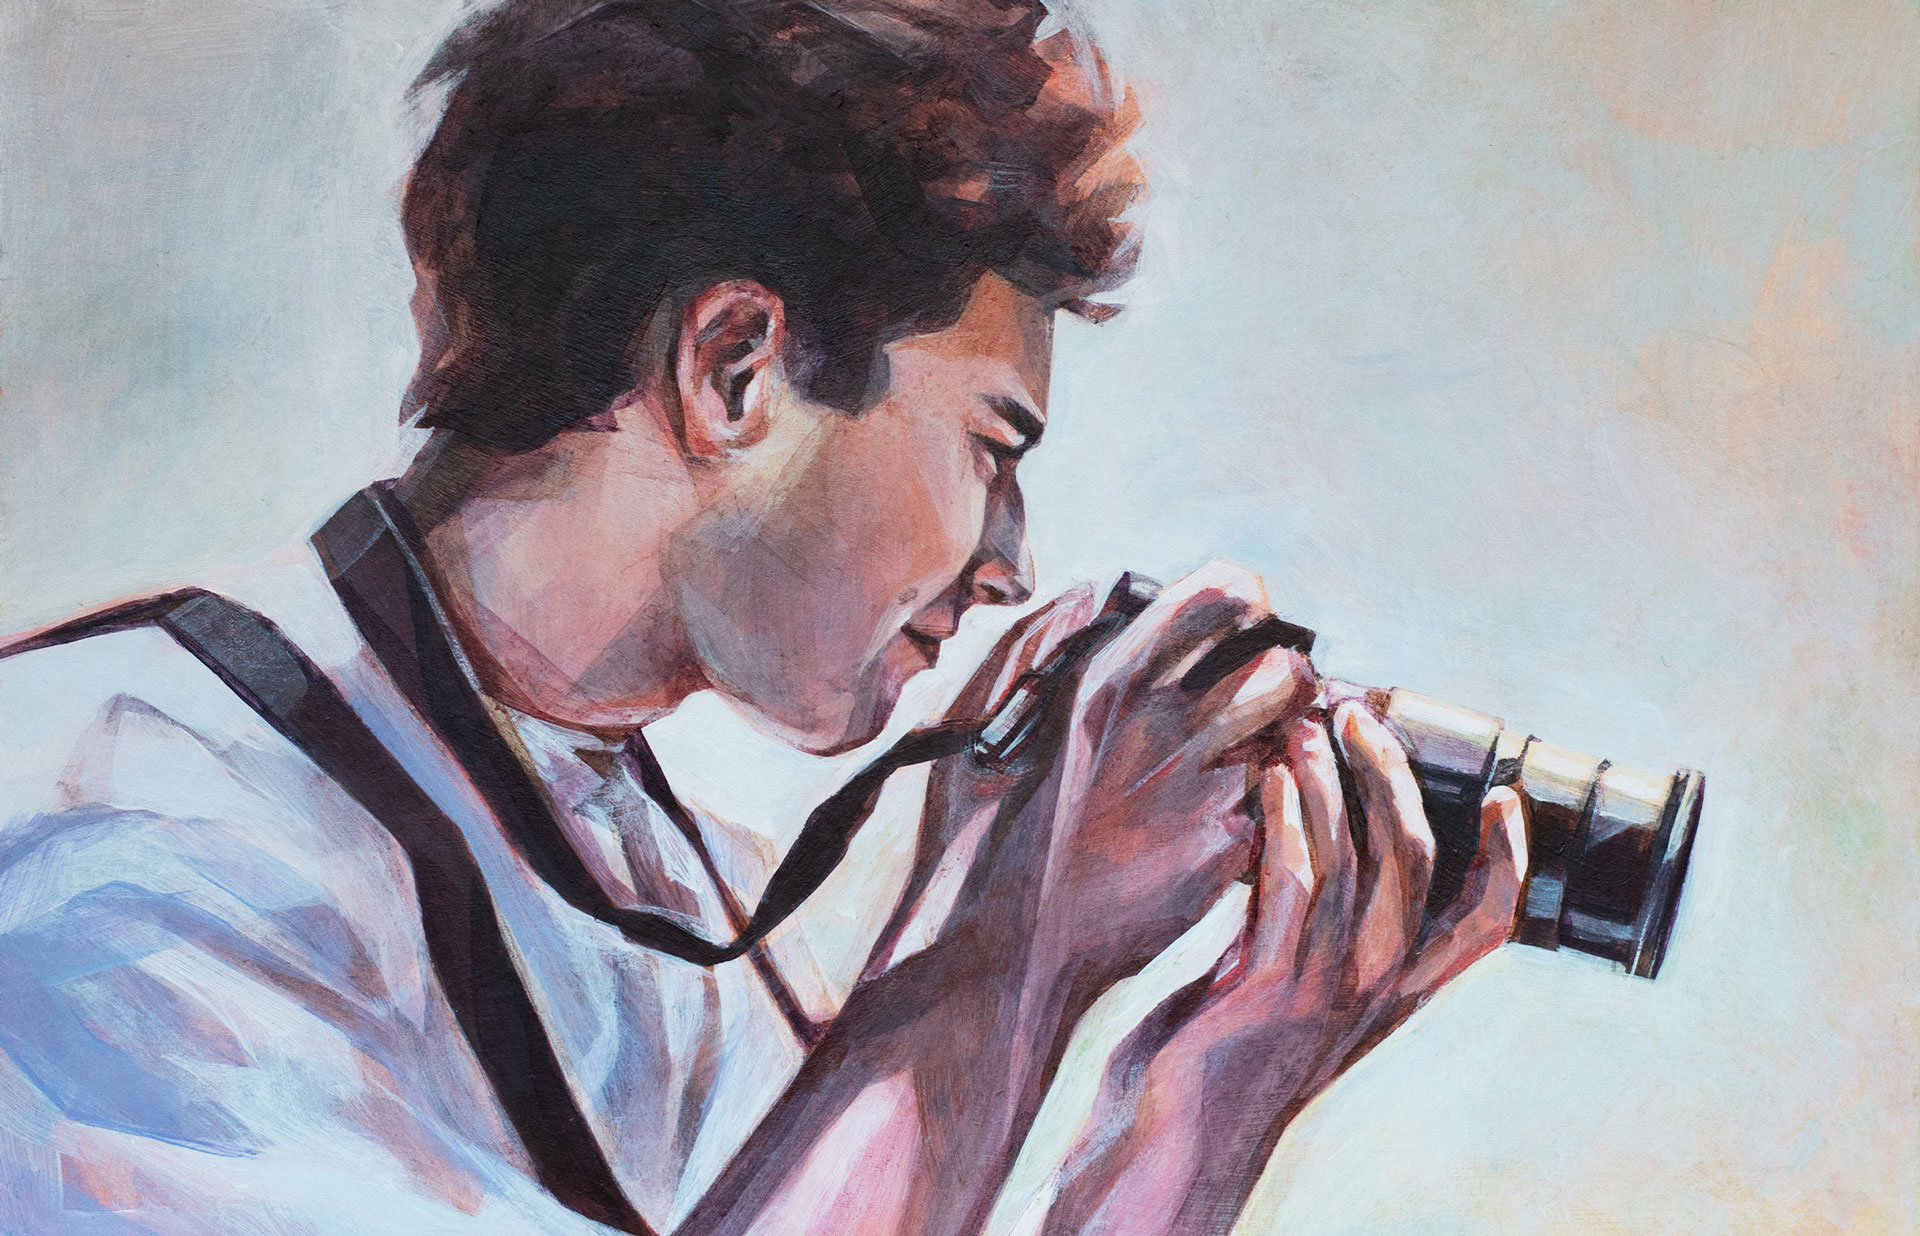 Acrylic painting portrait of a man holding a camera, seen from the side.